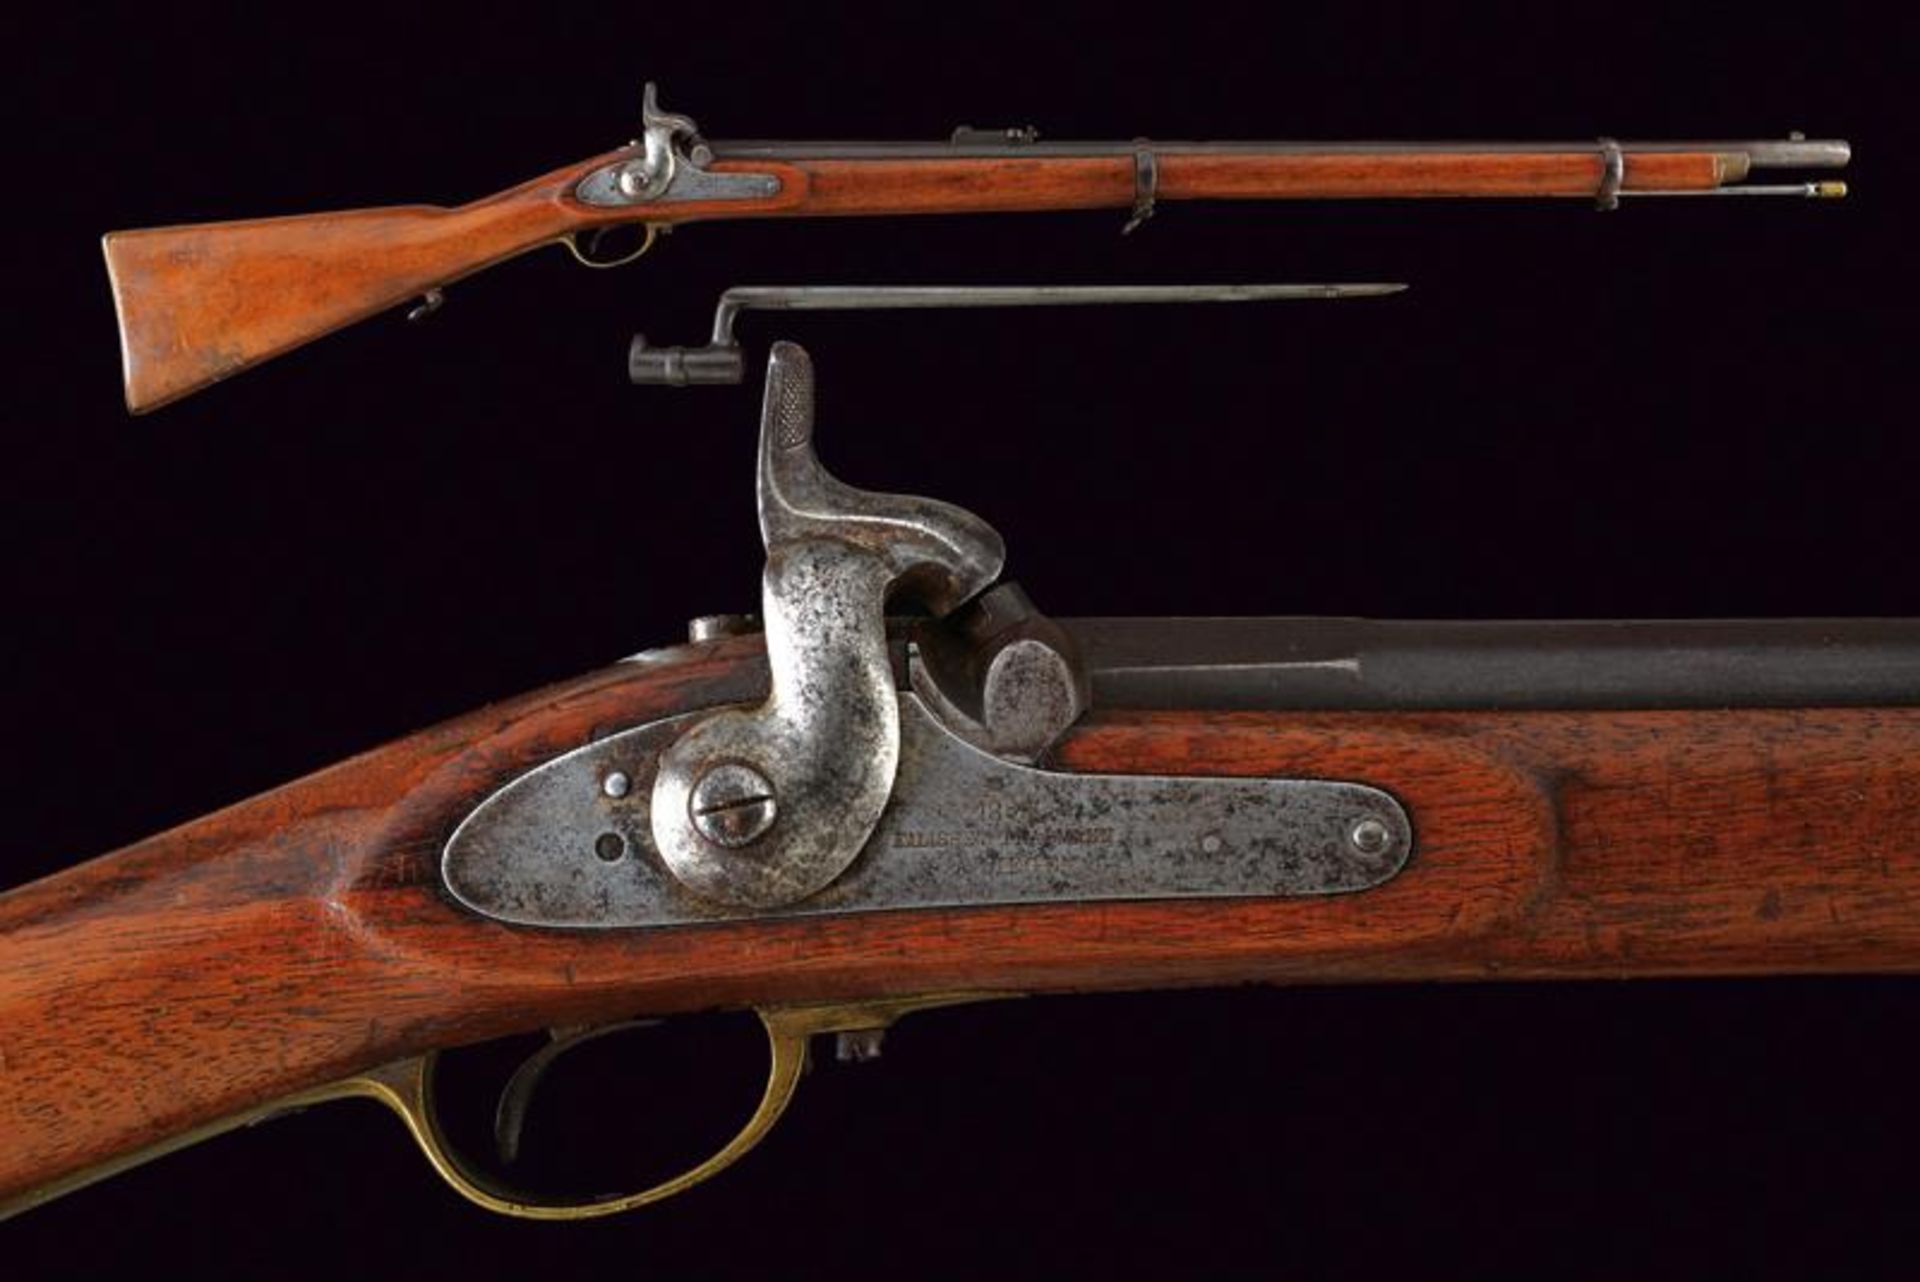 An Enfield model 1853 type percussion gun with bayonet